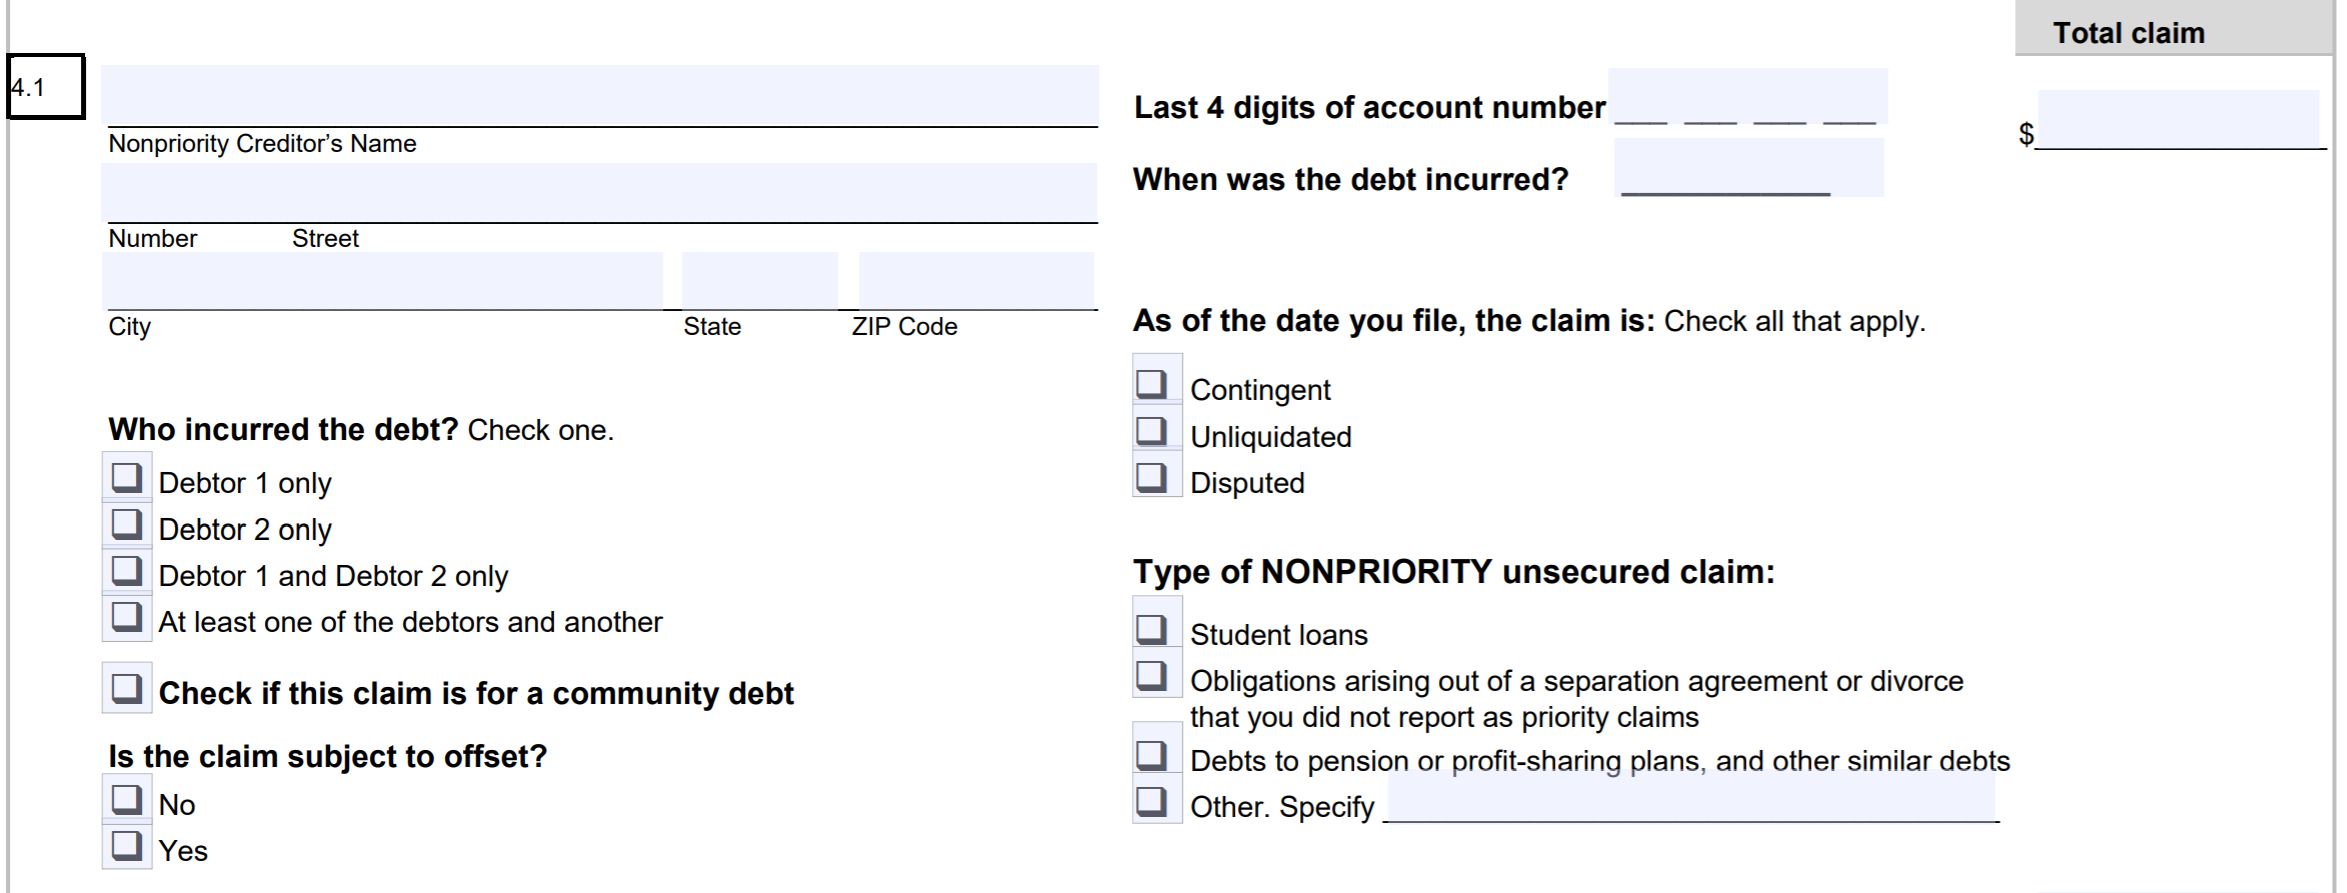 forms-106-ef-debt-nonpriority-q4.png